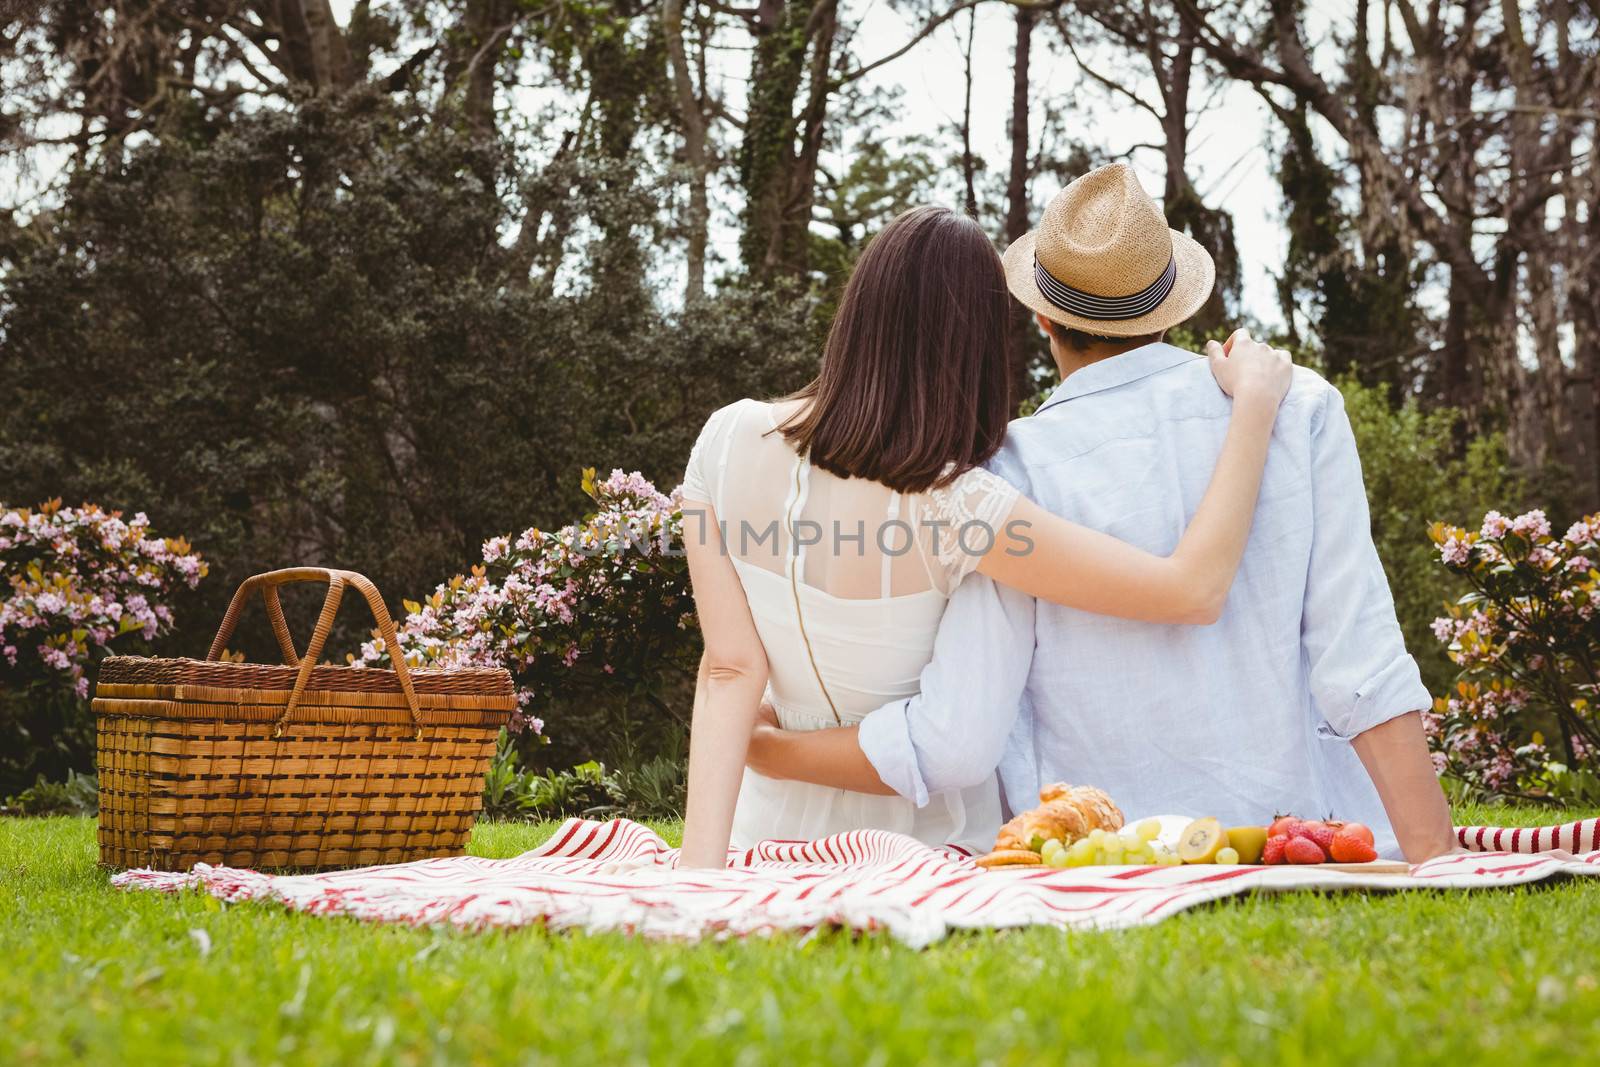 Rear view of young couple embracing each other in garden